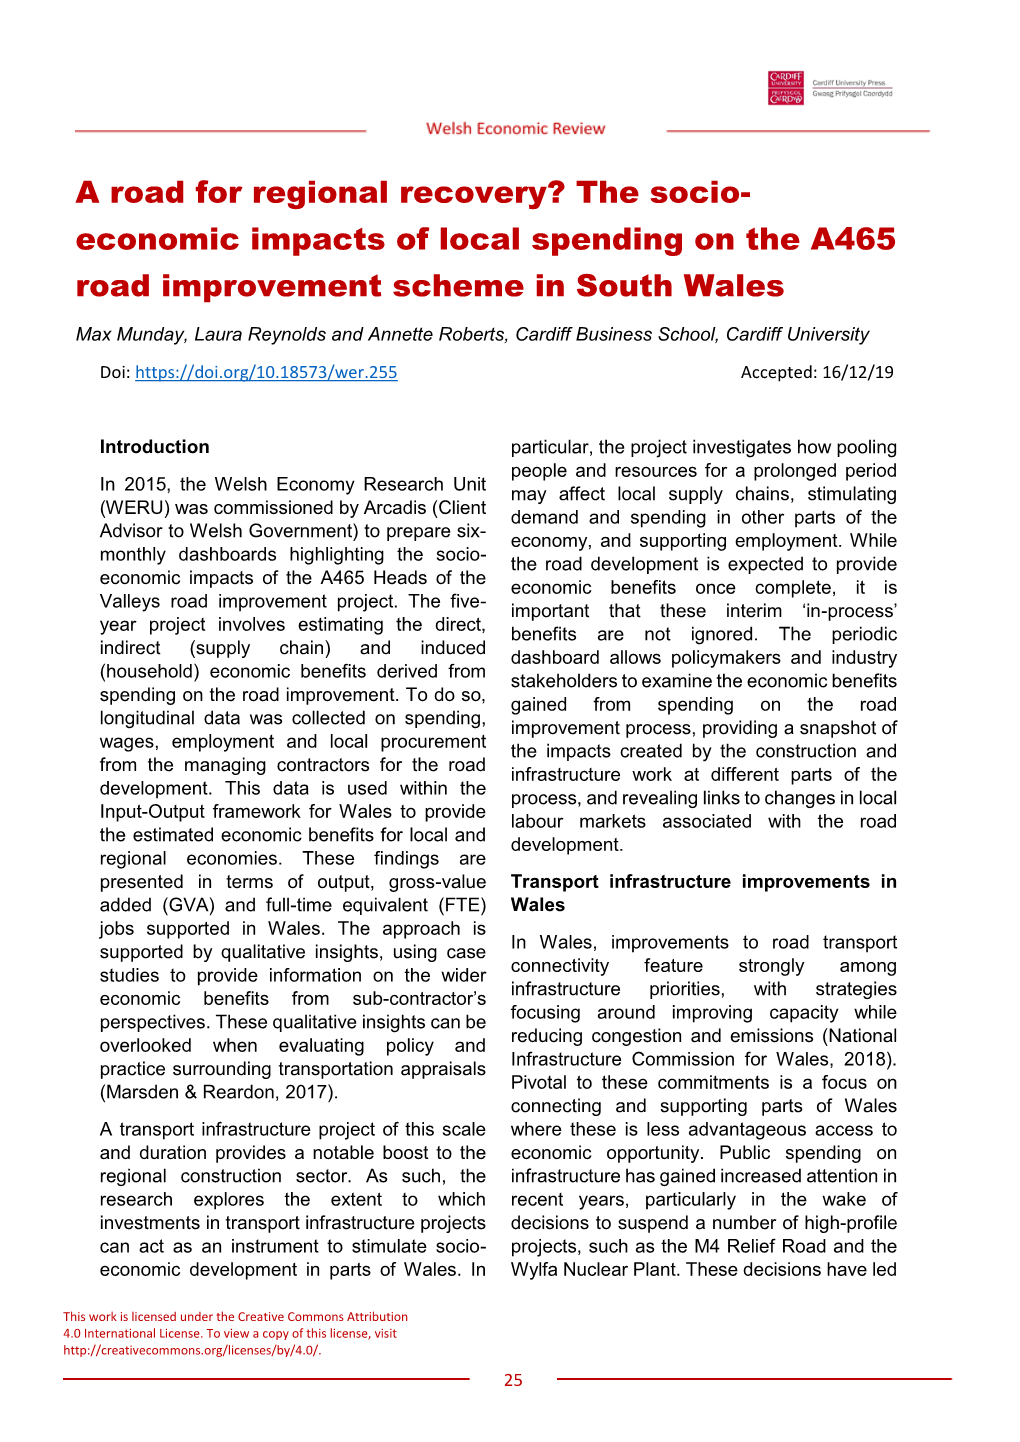 The Socio- Economic Impacts of Local Spending on the A465 Road Improvement Scheme in South Wales